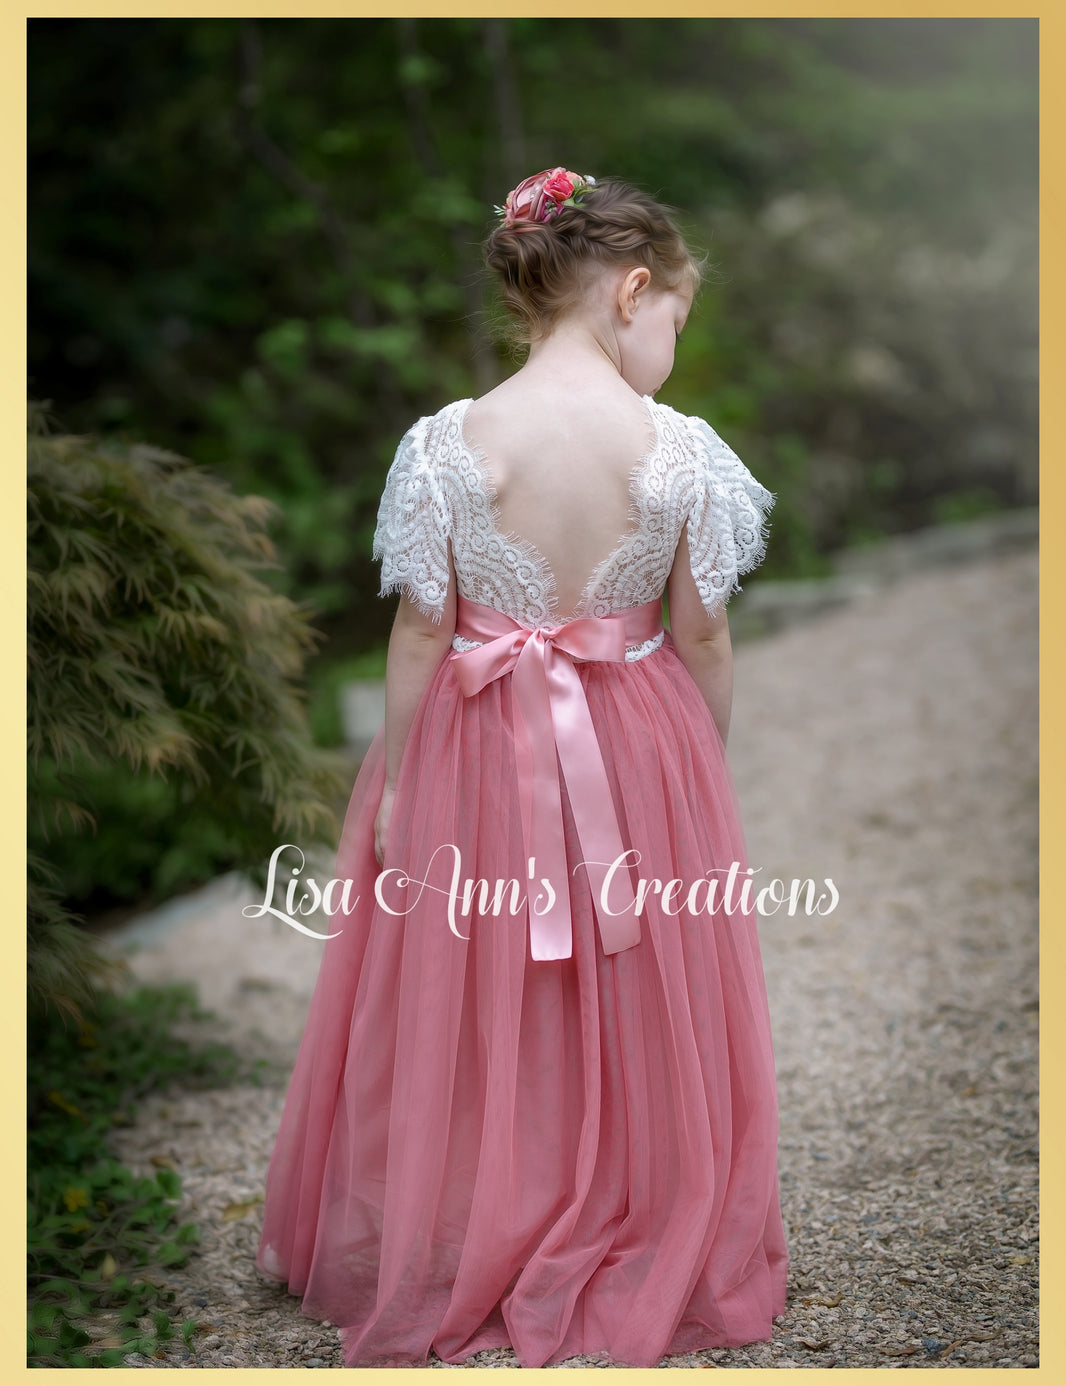 Lisa Ann's Creations: Flower Girl and Special Occasion Dresses